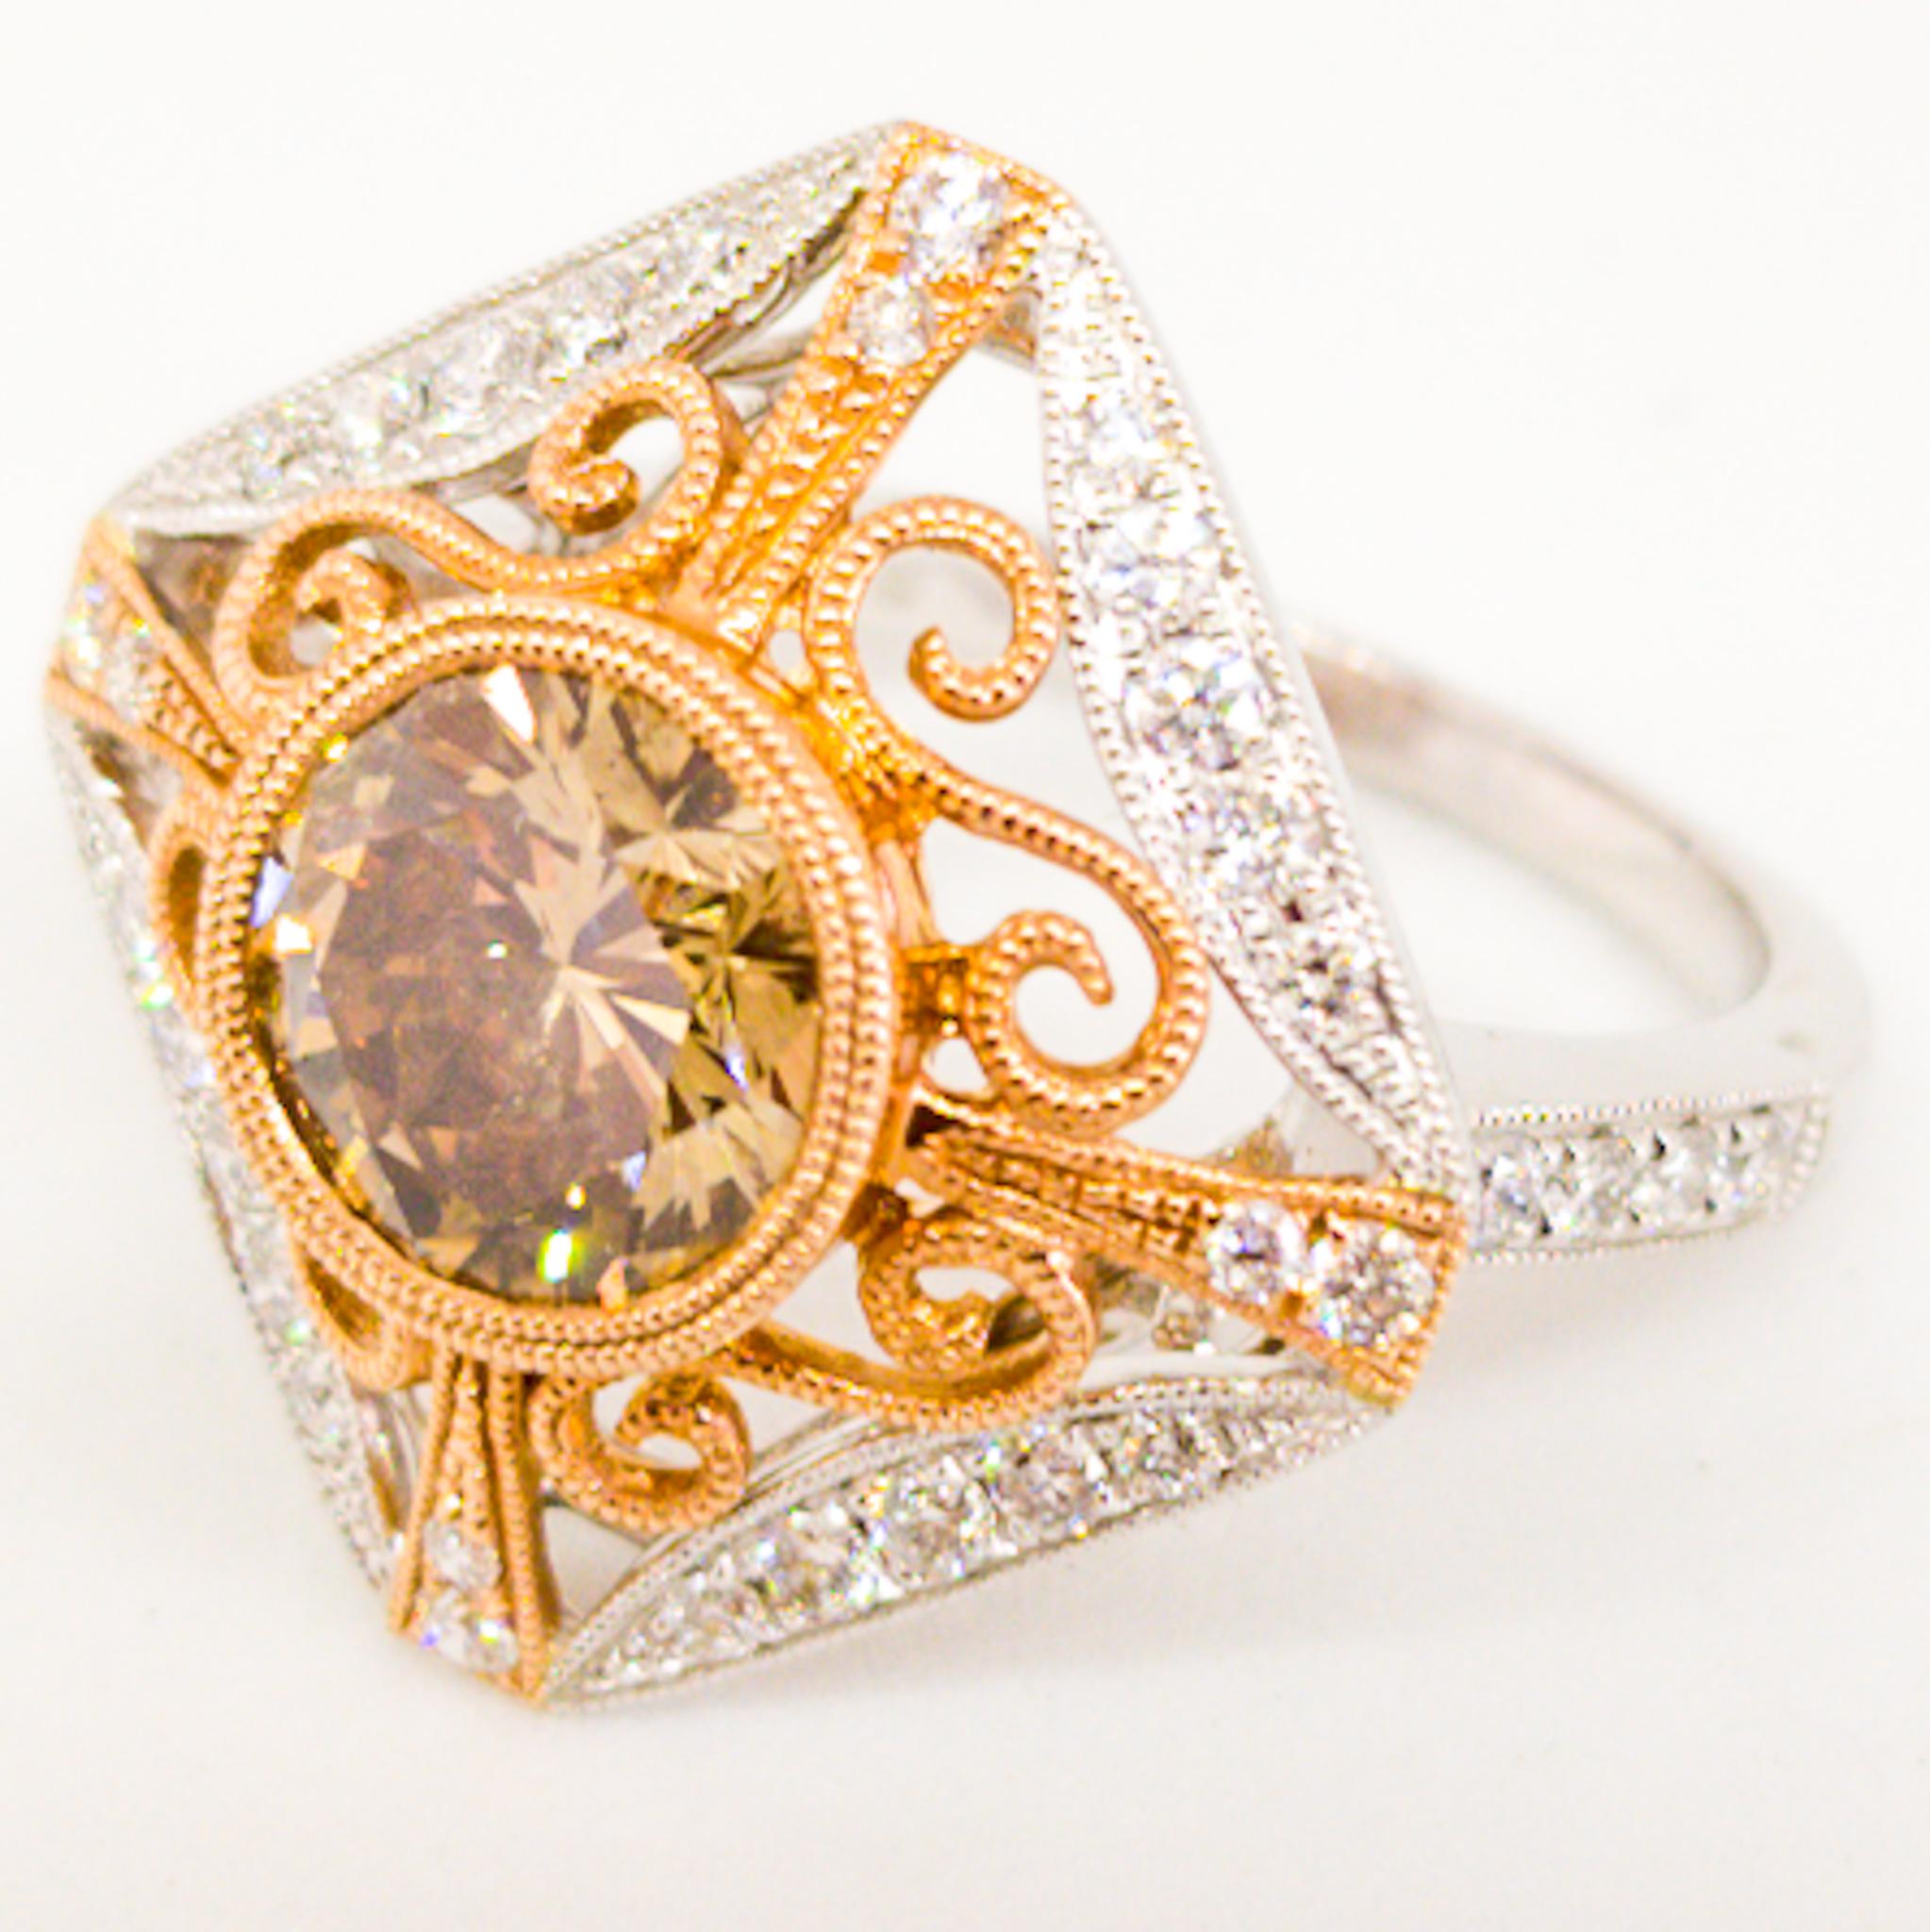 Natural Fancy Champagne Diamond Ring 2.26 Carat Filigree White and Rose Gold For Sale 2